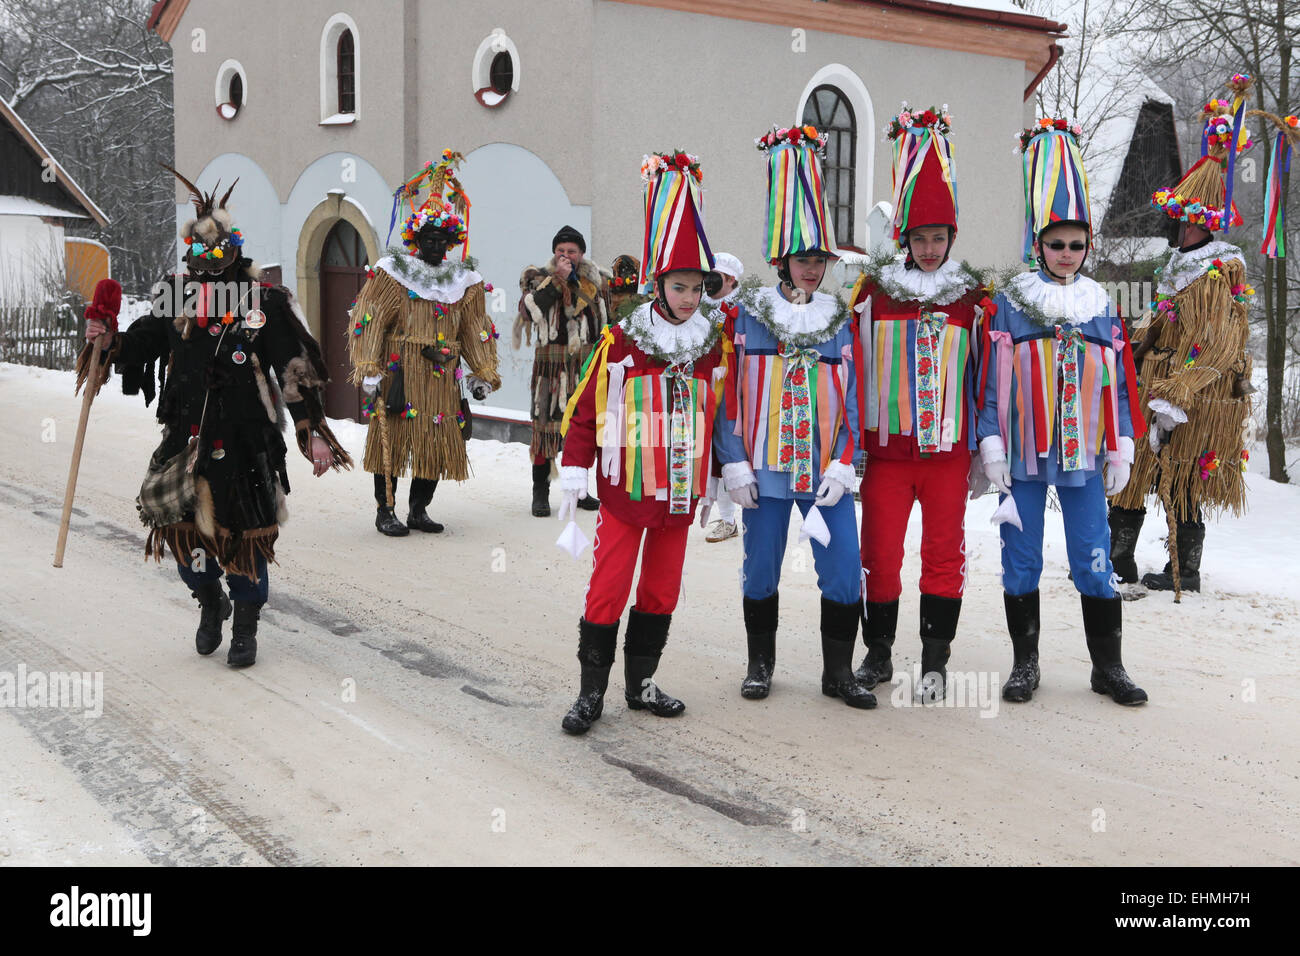 People attend the Masopust Carnival, a ceremonial Shrovetide door-to-door procession, in Vitanov near Pardubice, Czech Republic. Stock Photo